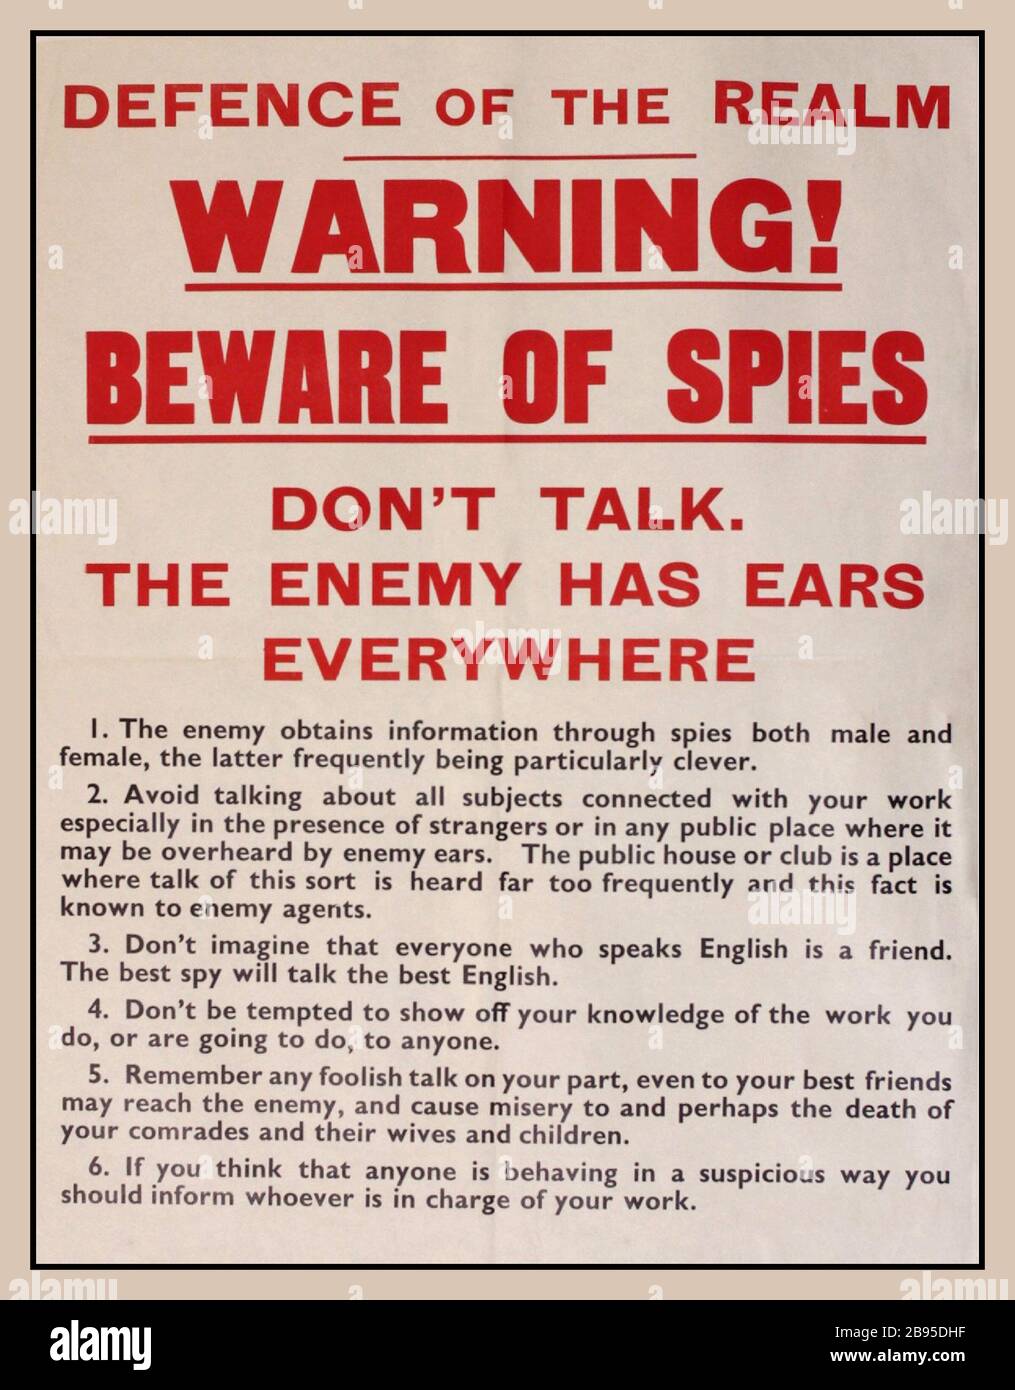 Vintage WW2 Propaganda Information Poster Defence of the Realm,  SPIES SPYING Archive World War II Propaganda Information Poster ‘Warning ! Beware of Spies, Don't Talk The Enemy Has Ears Everywhere,’.  printed by H & S September 1939  World War II public information poster playing on the possible outcomes of careless talk ; and Official Secrets Acts, 1911 Stock Photo